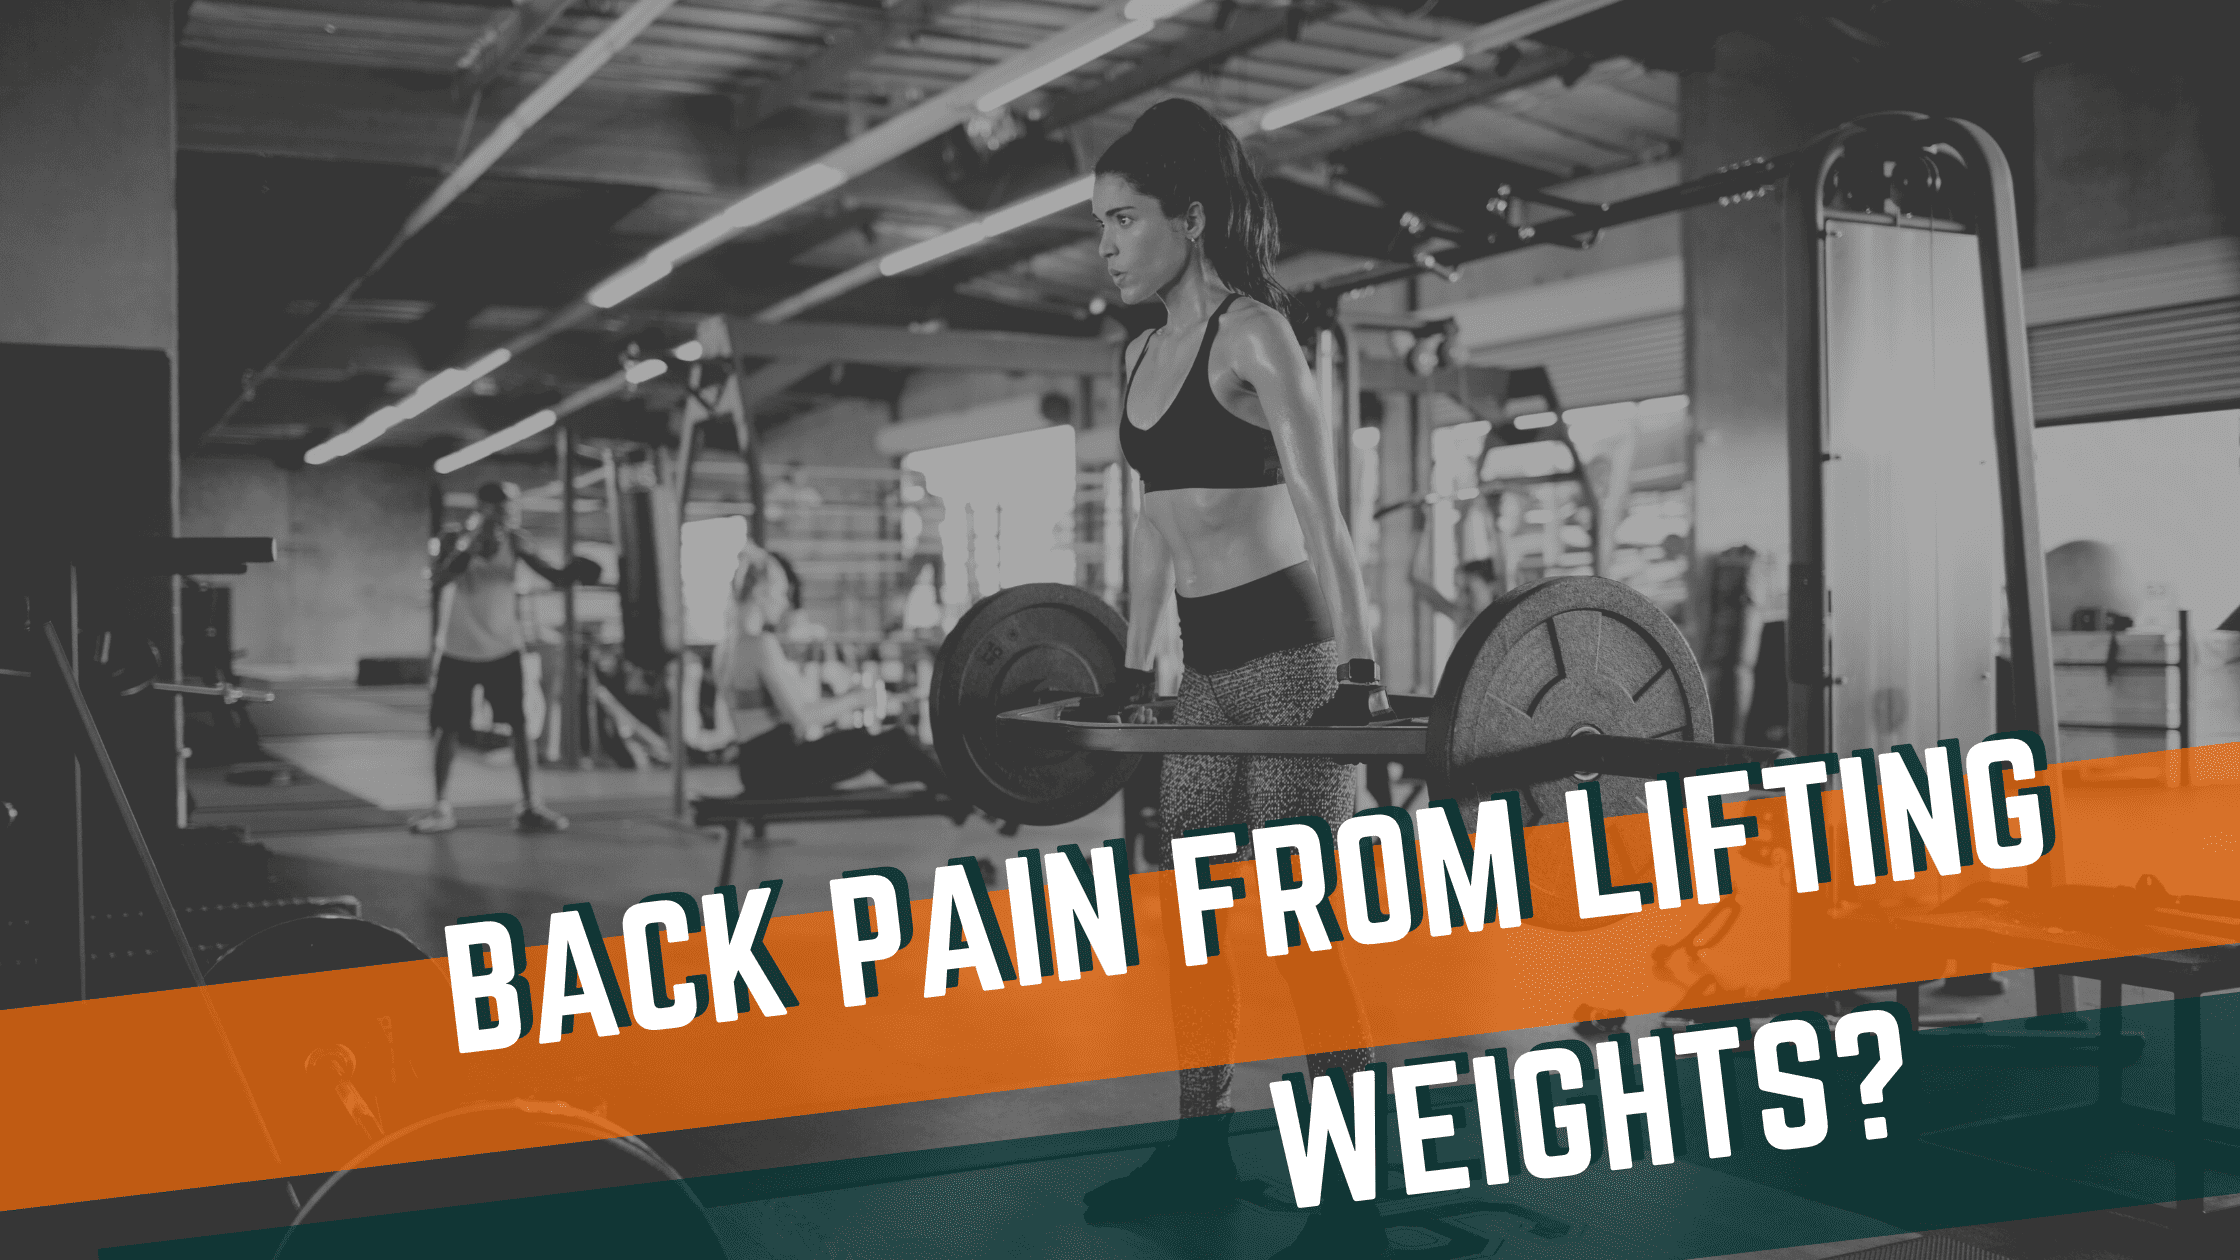 Experiencing Back Pain from Lifting Weights? Common Weightlifting Mistakes & Tips for Proper Form